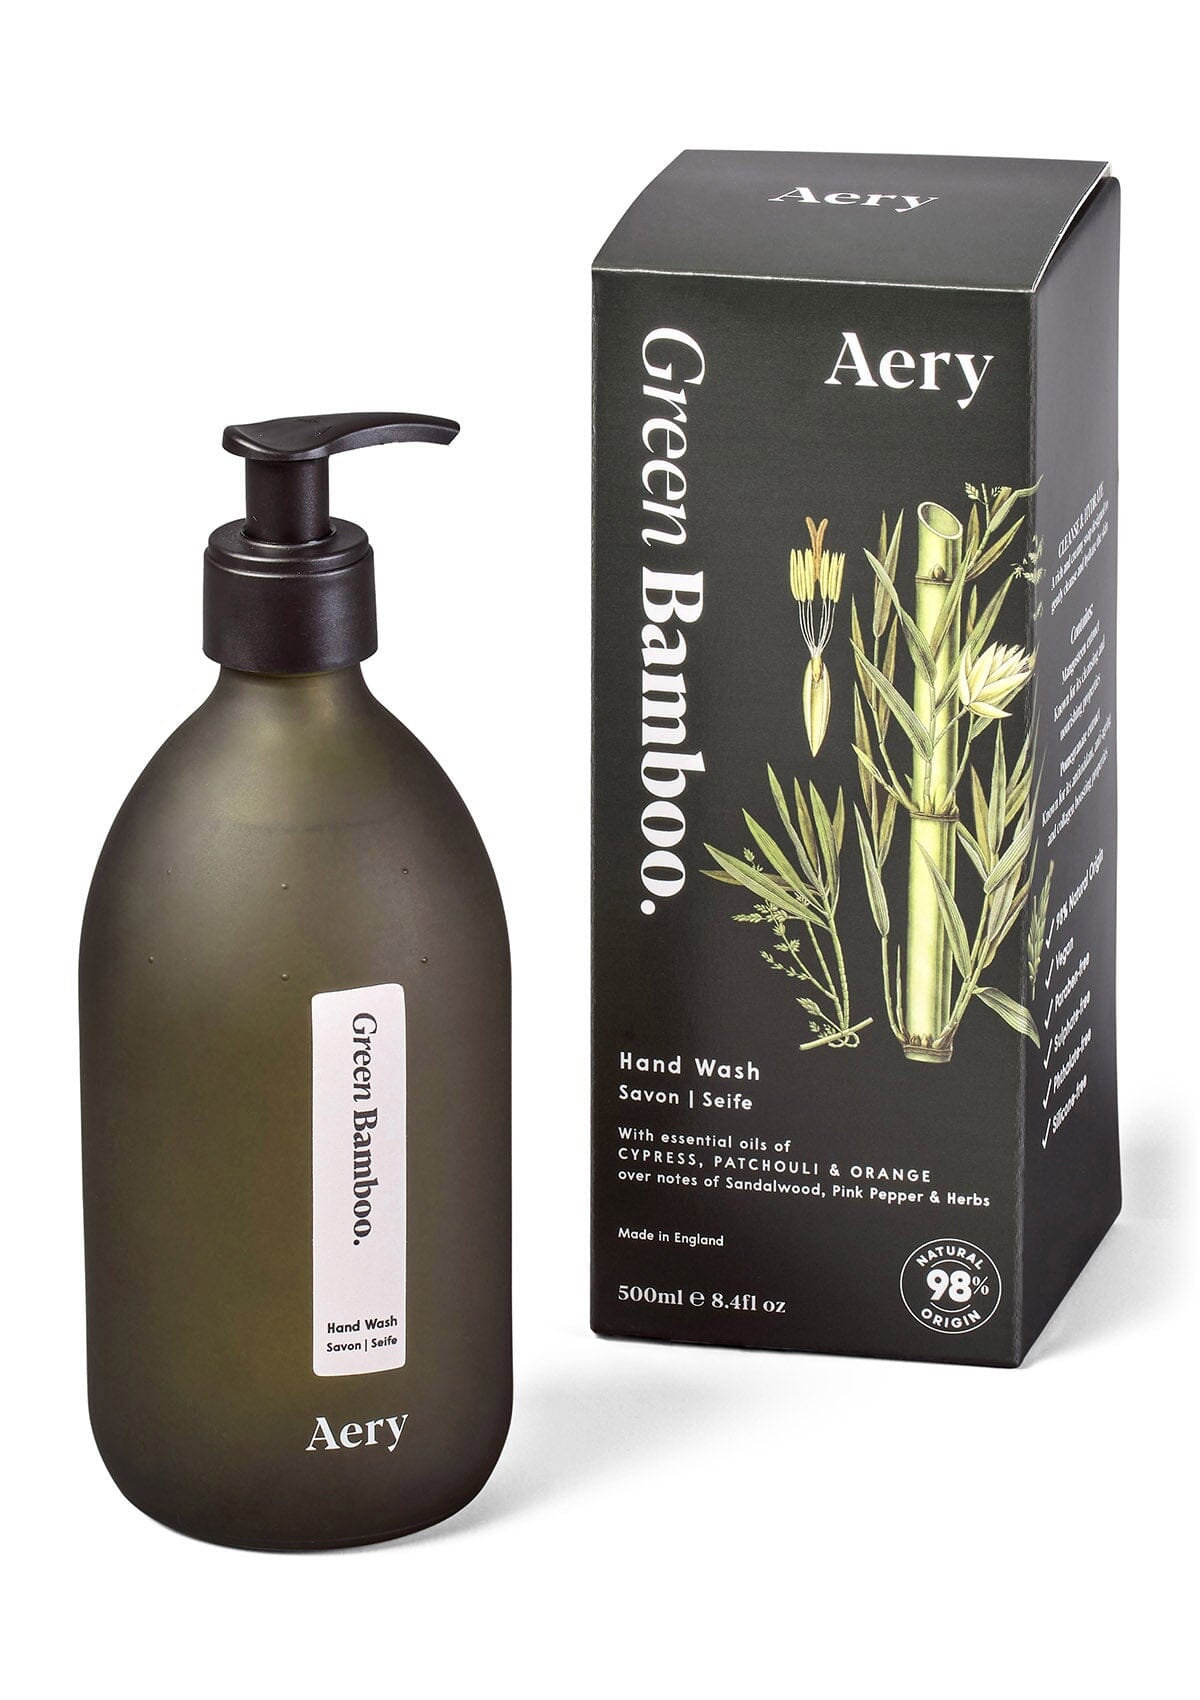 Green Bamboo Hand Wash displayed next to product packaging by Aery on white background